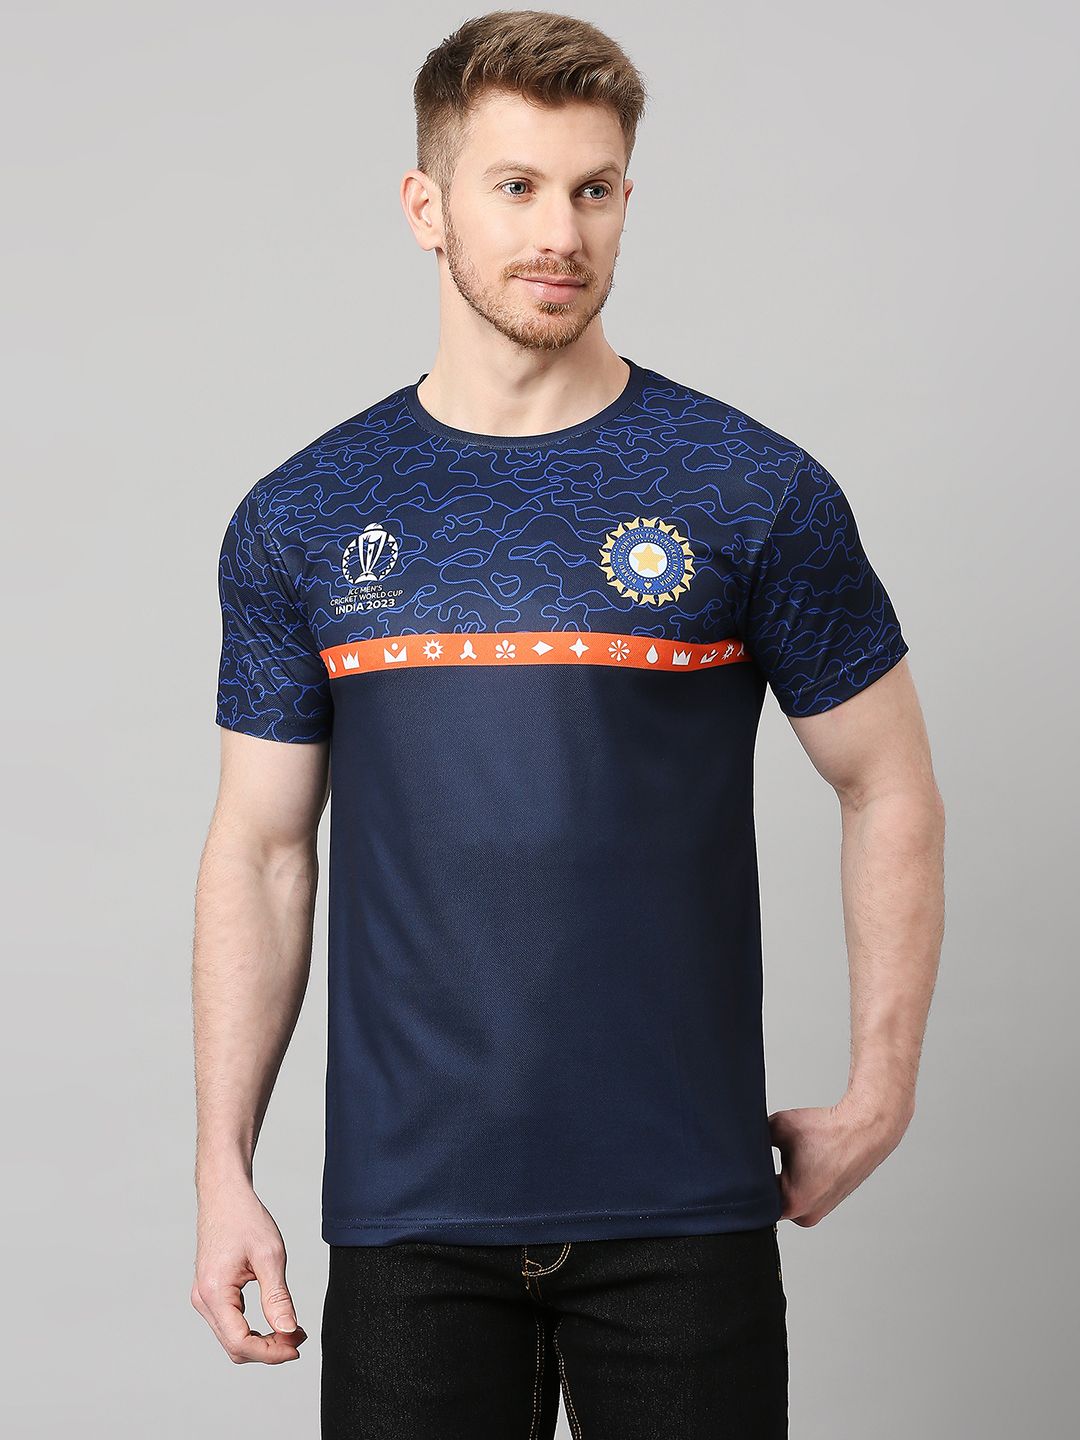 Official ICC CWC-23 Men Navy Blue Printed Short Sleeves Round Neck T-Shirt